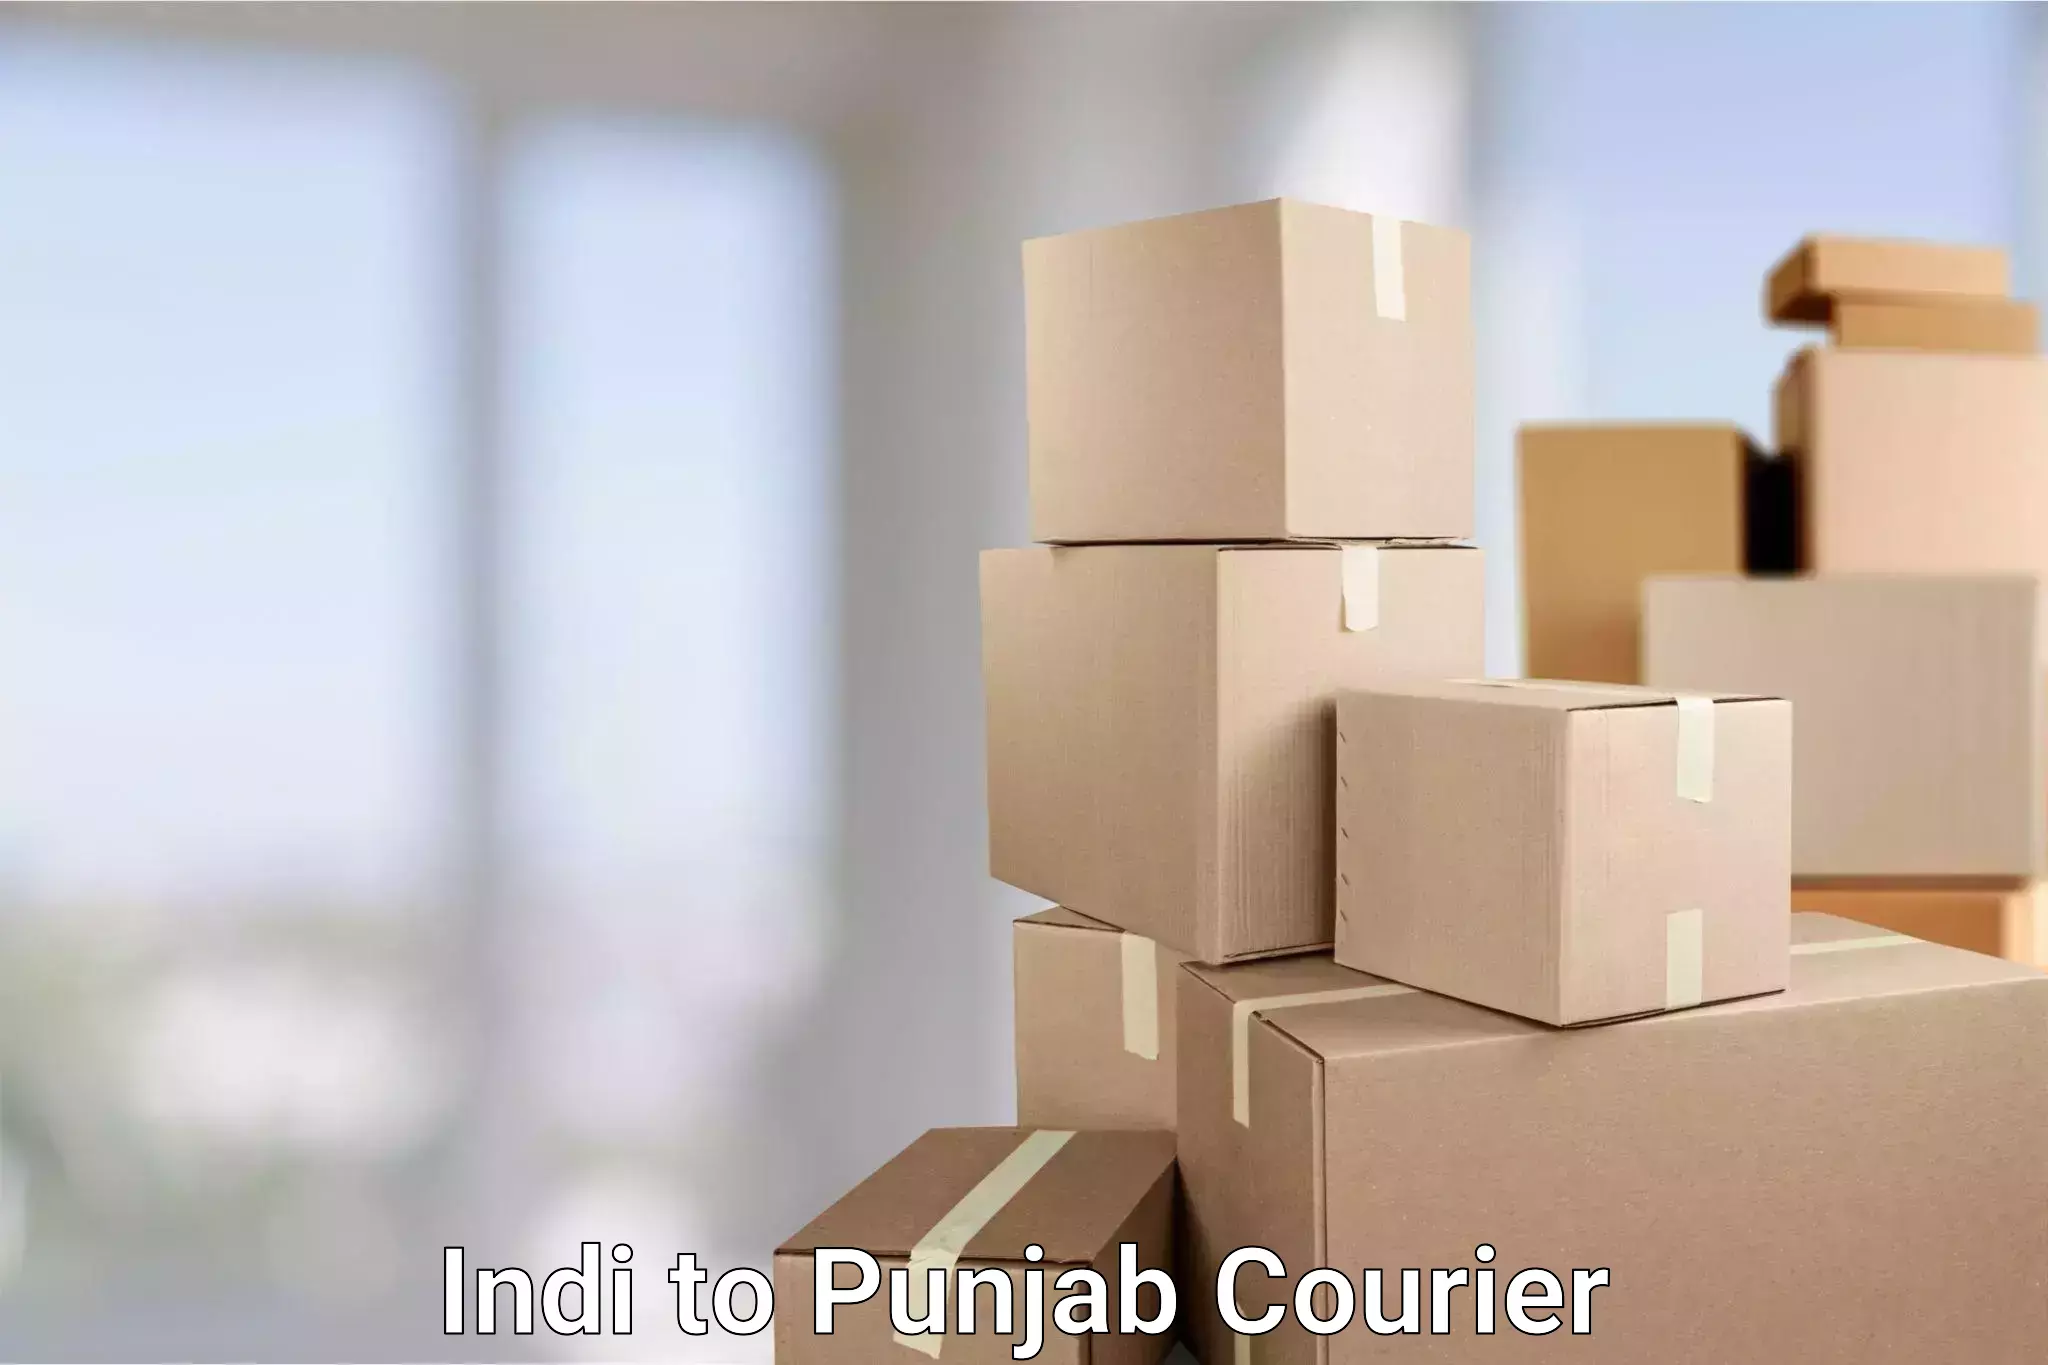 Supply chain delivery Indi to Punjab